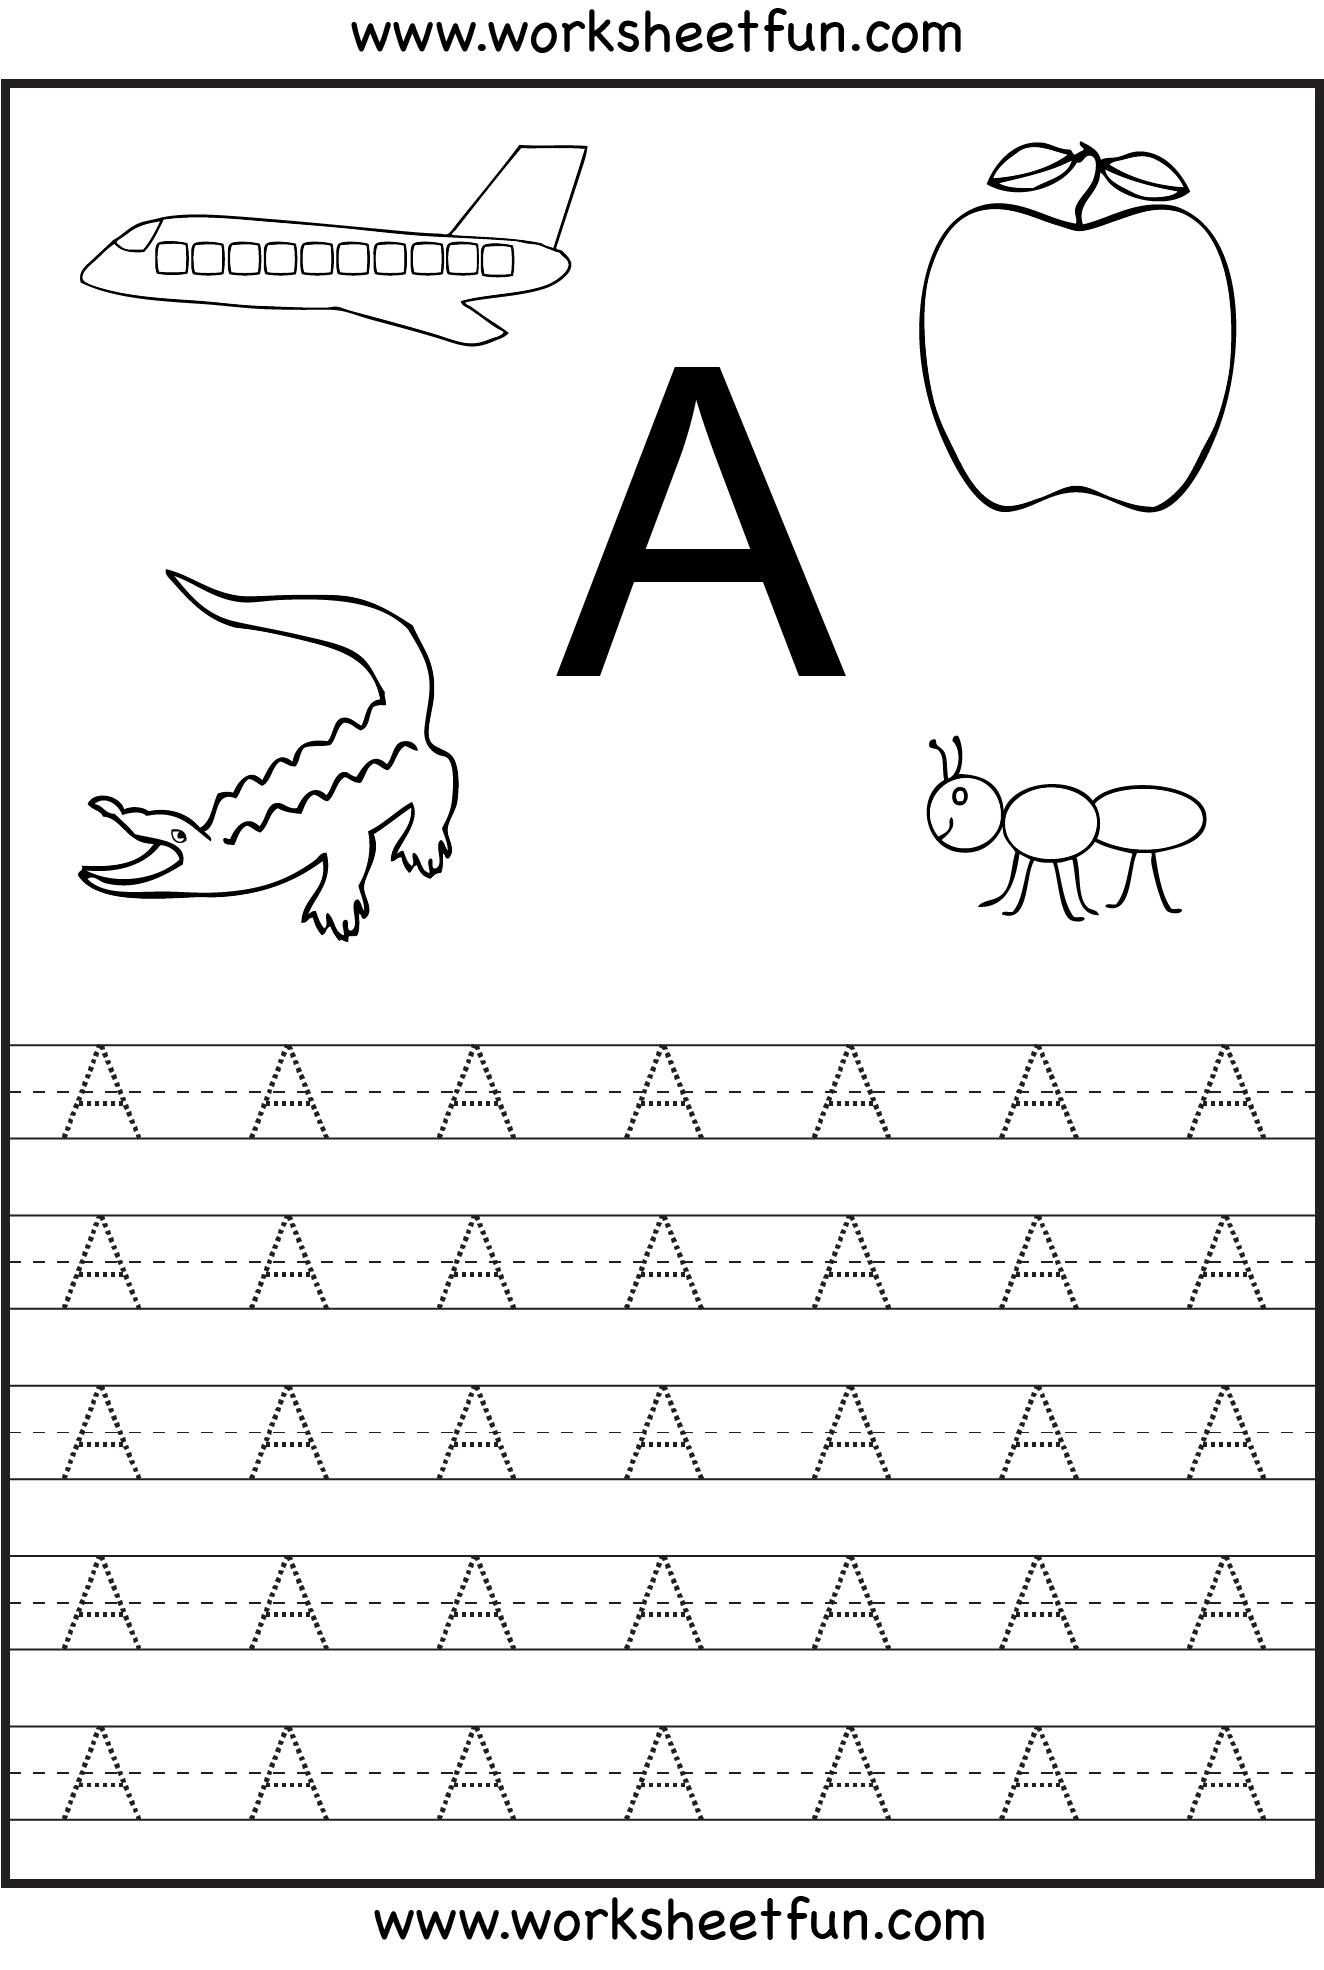 Free Printable Worksheets: January 2009 | Tracing Worksheets within Alphabet Tracing Free